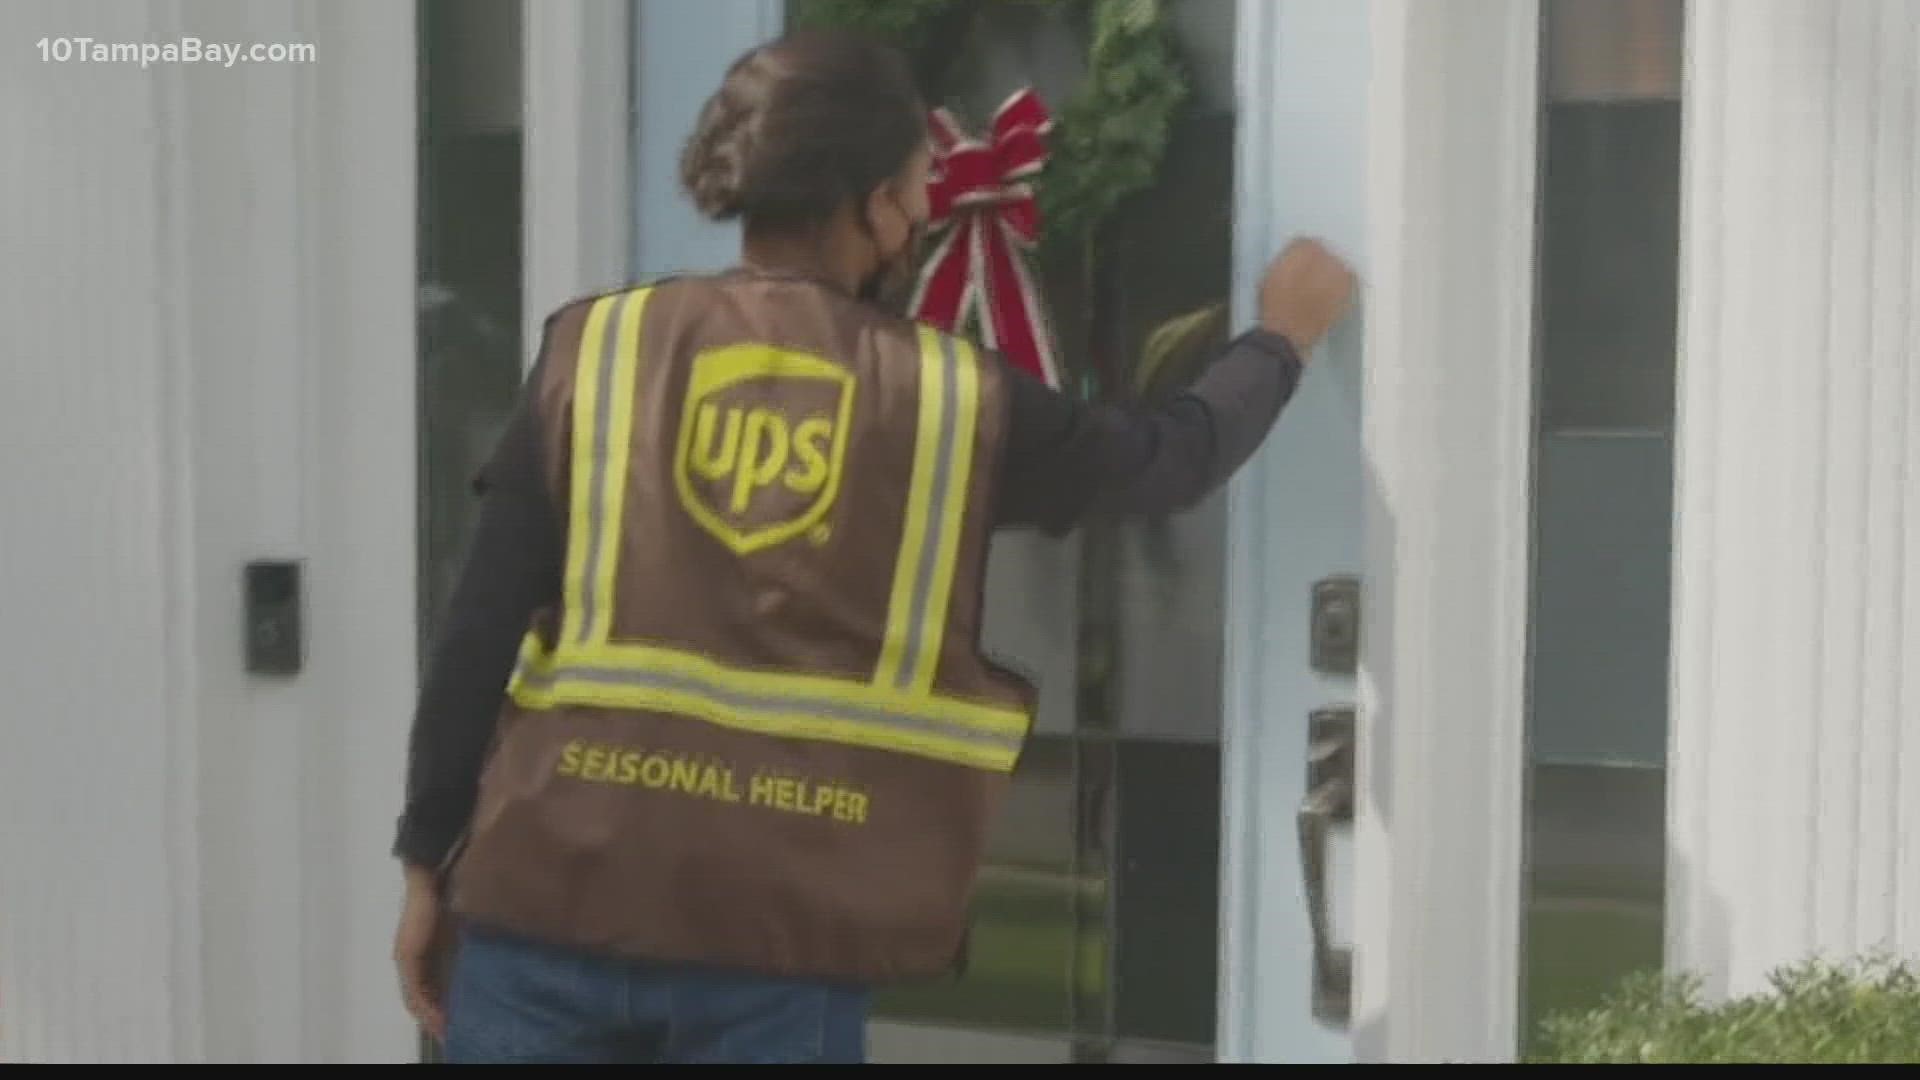 UPS begins preparing for the holiday season as soon as the previous season ends. In a competitive job market, the company is incentivizing referrals.